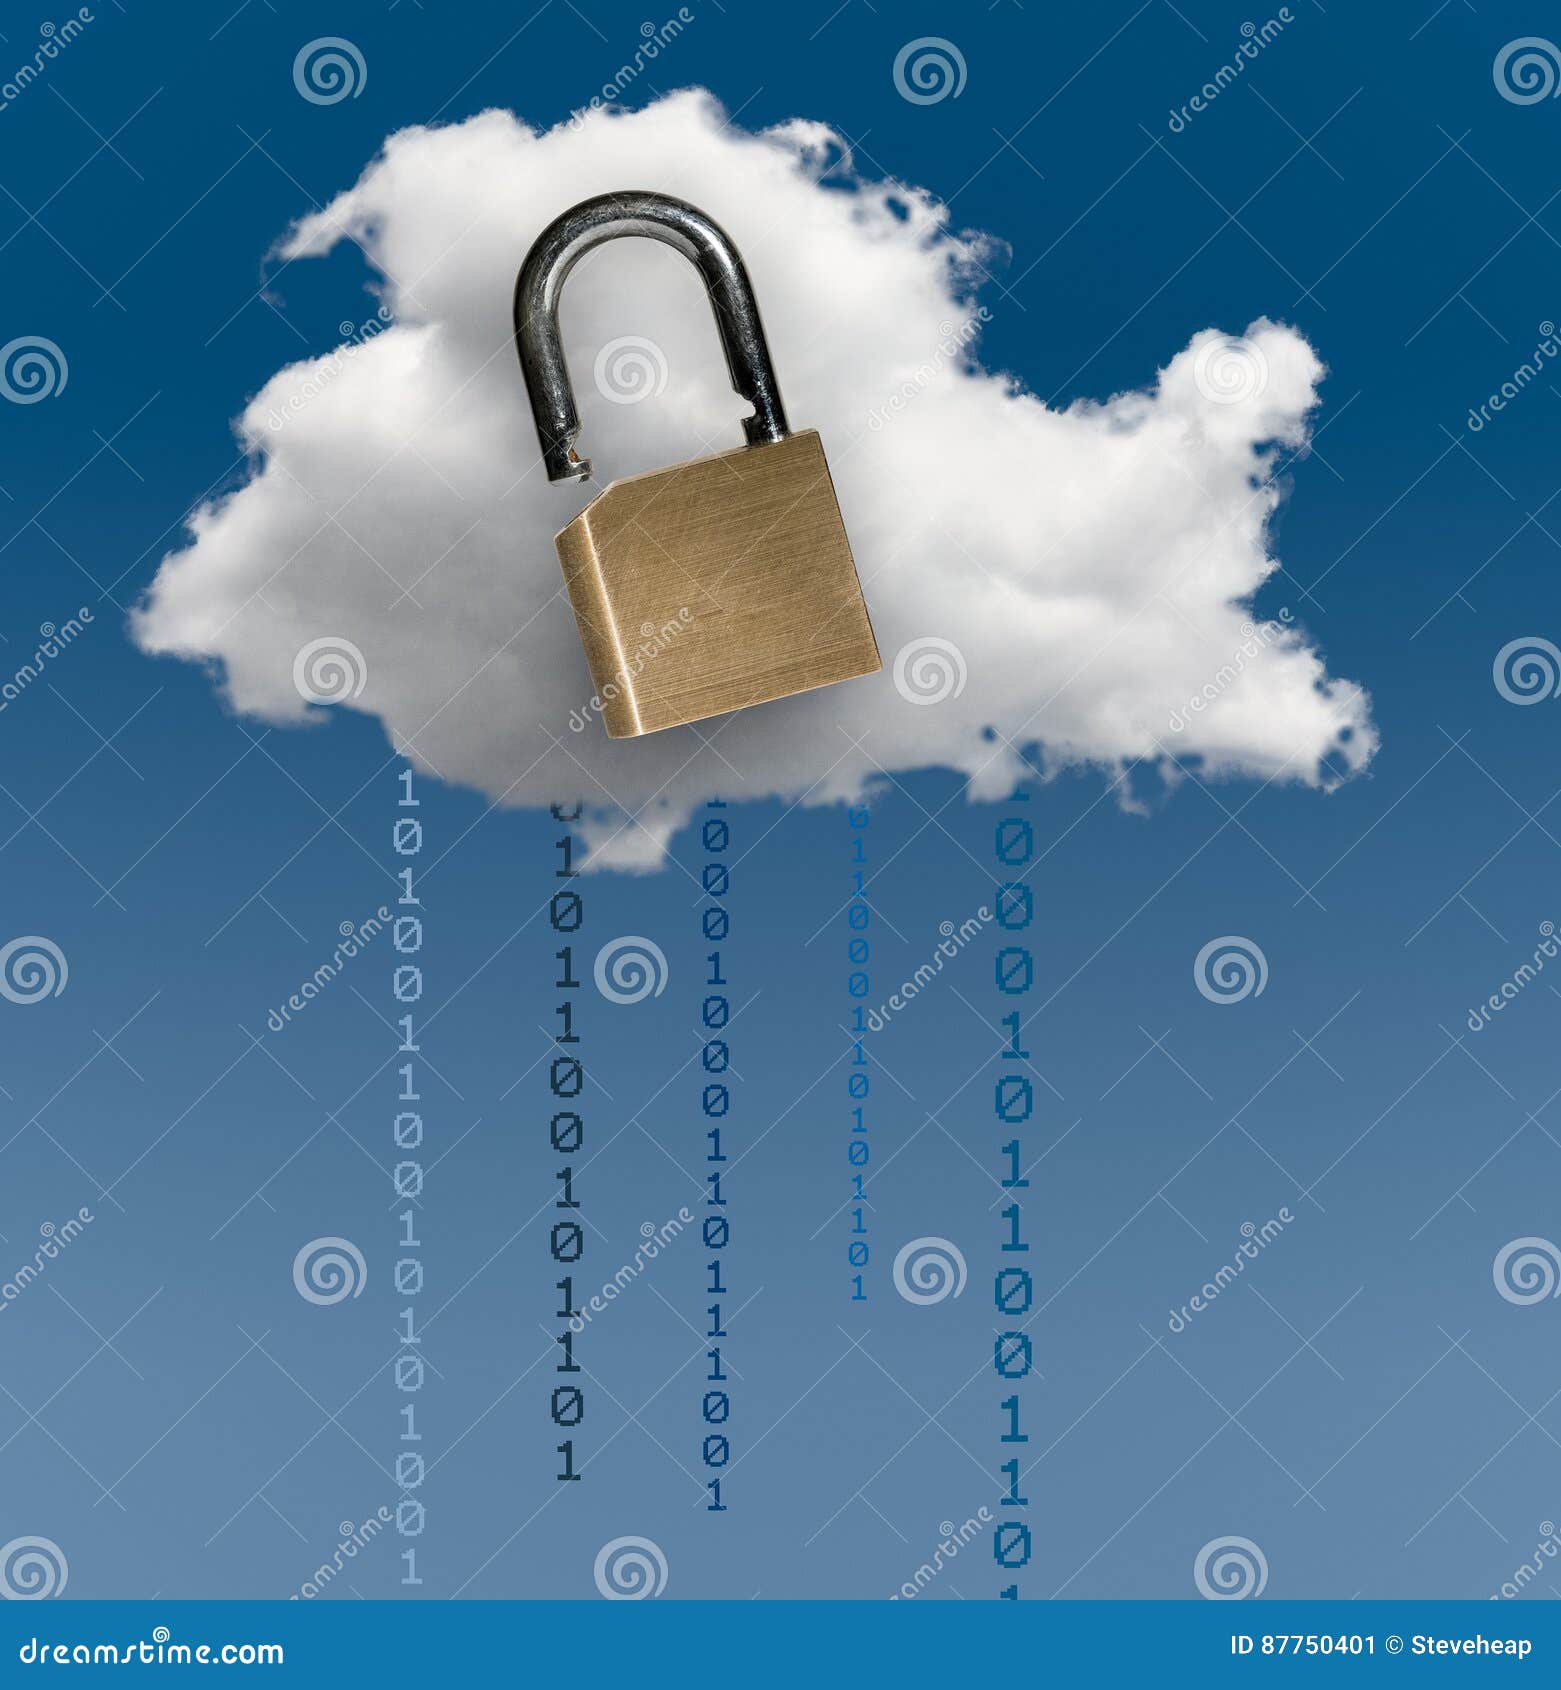 Illustration of Cloud Computing Security Challenges Stock Image - Image